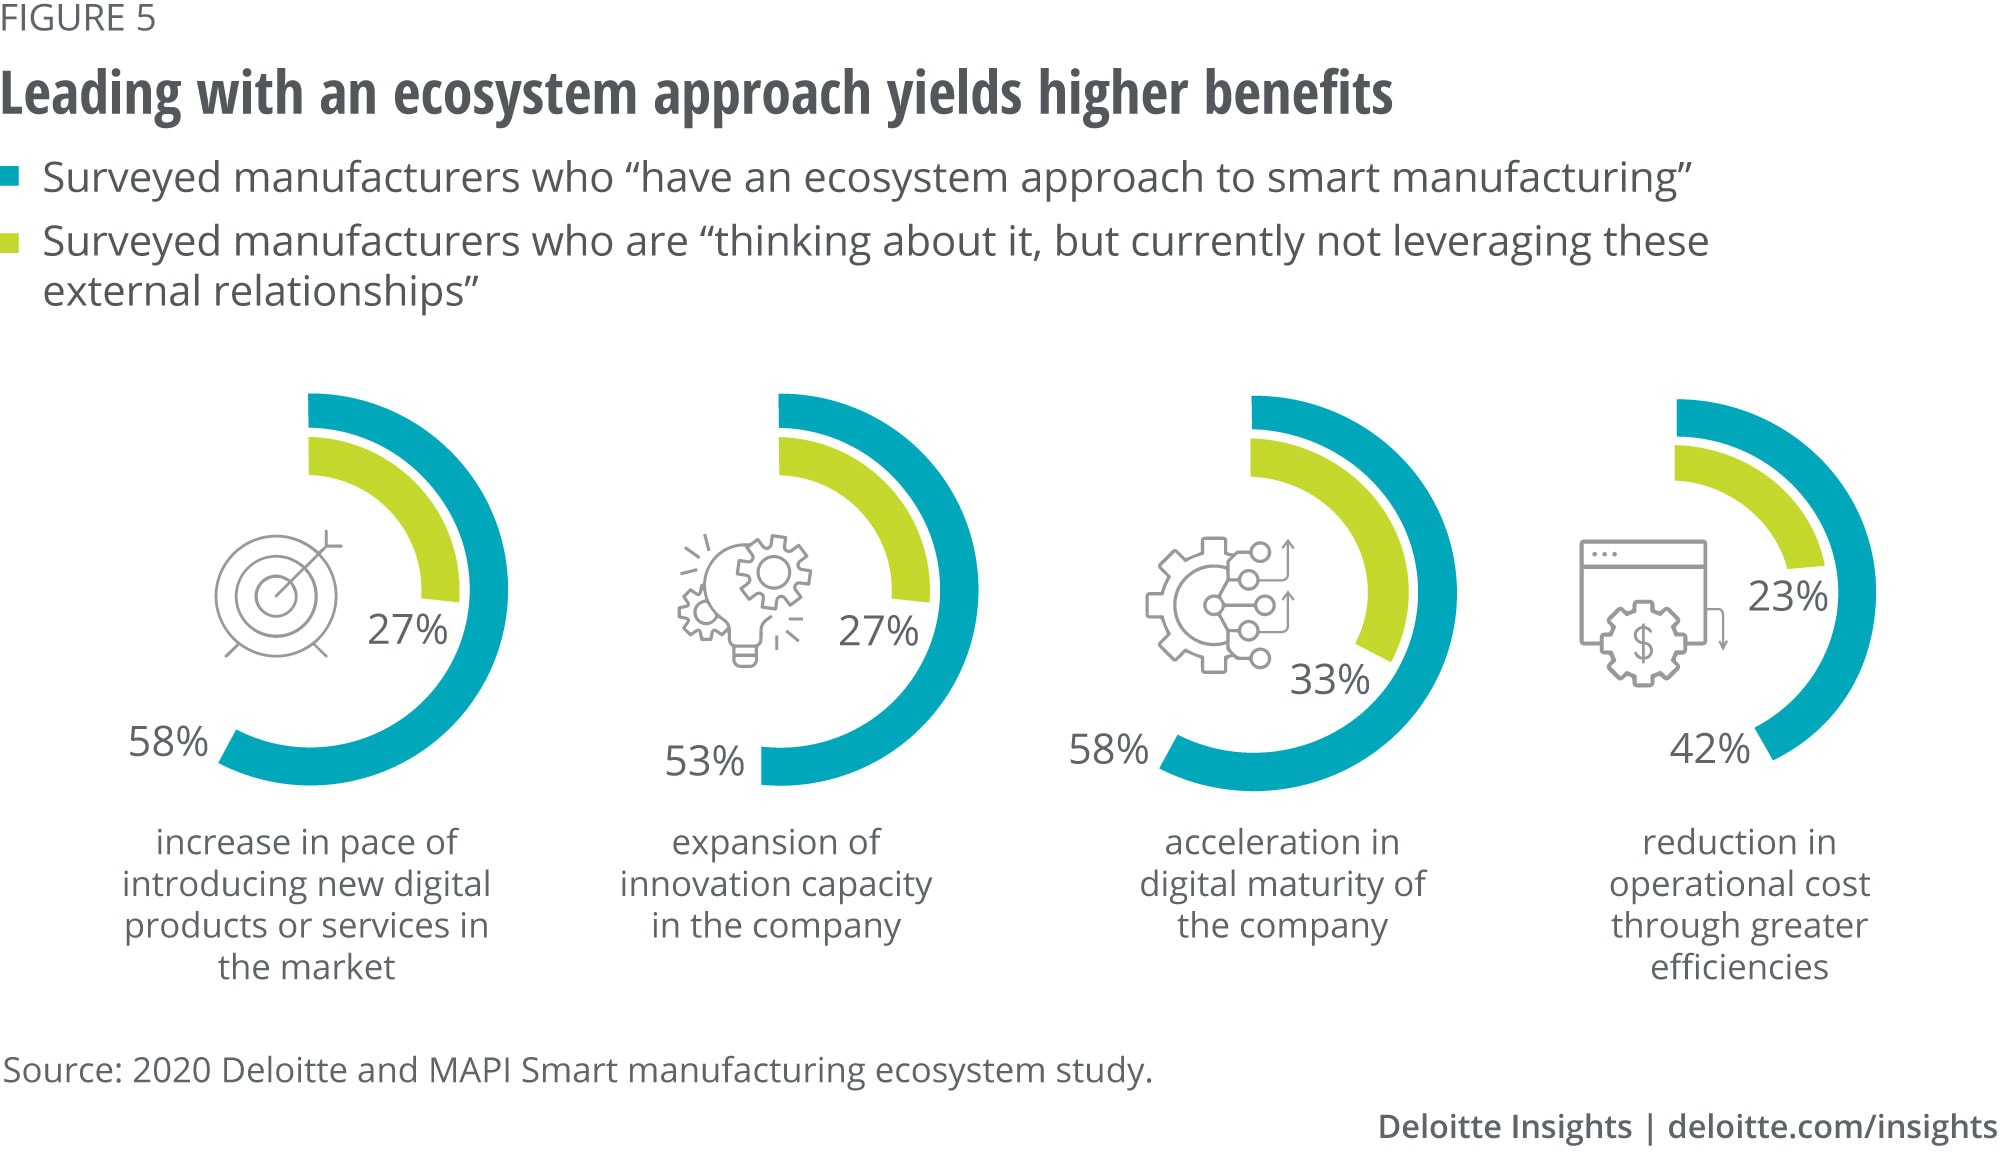 Leading with an ecosystem approach can yield higher benefits